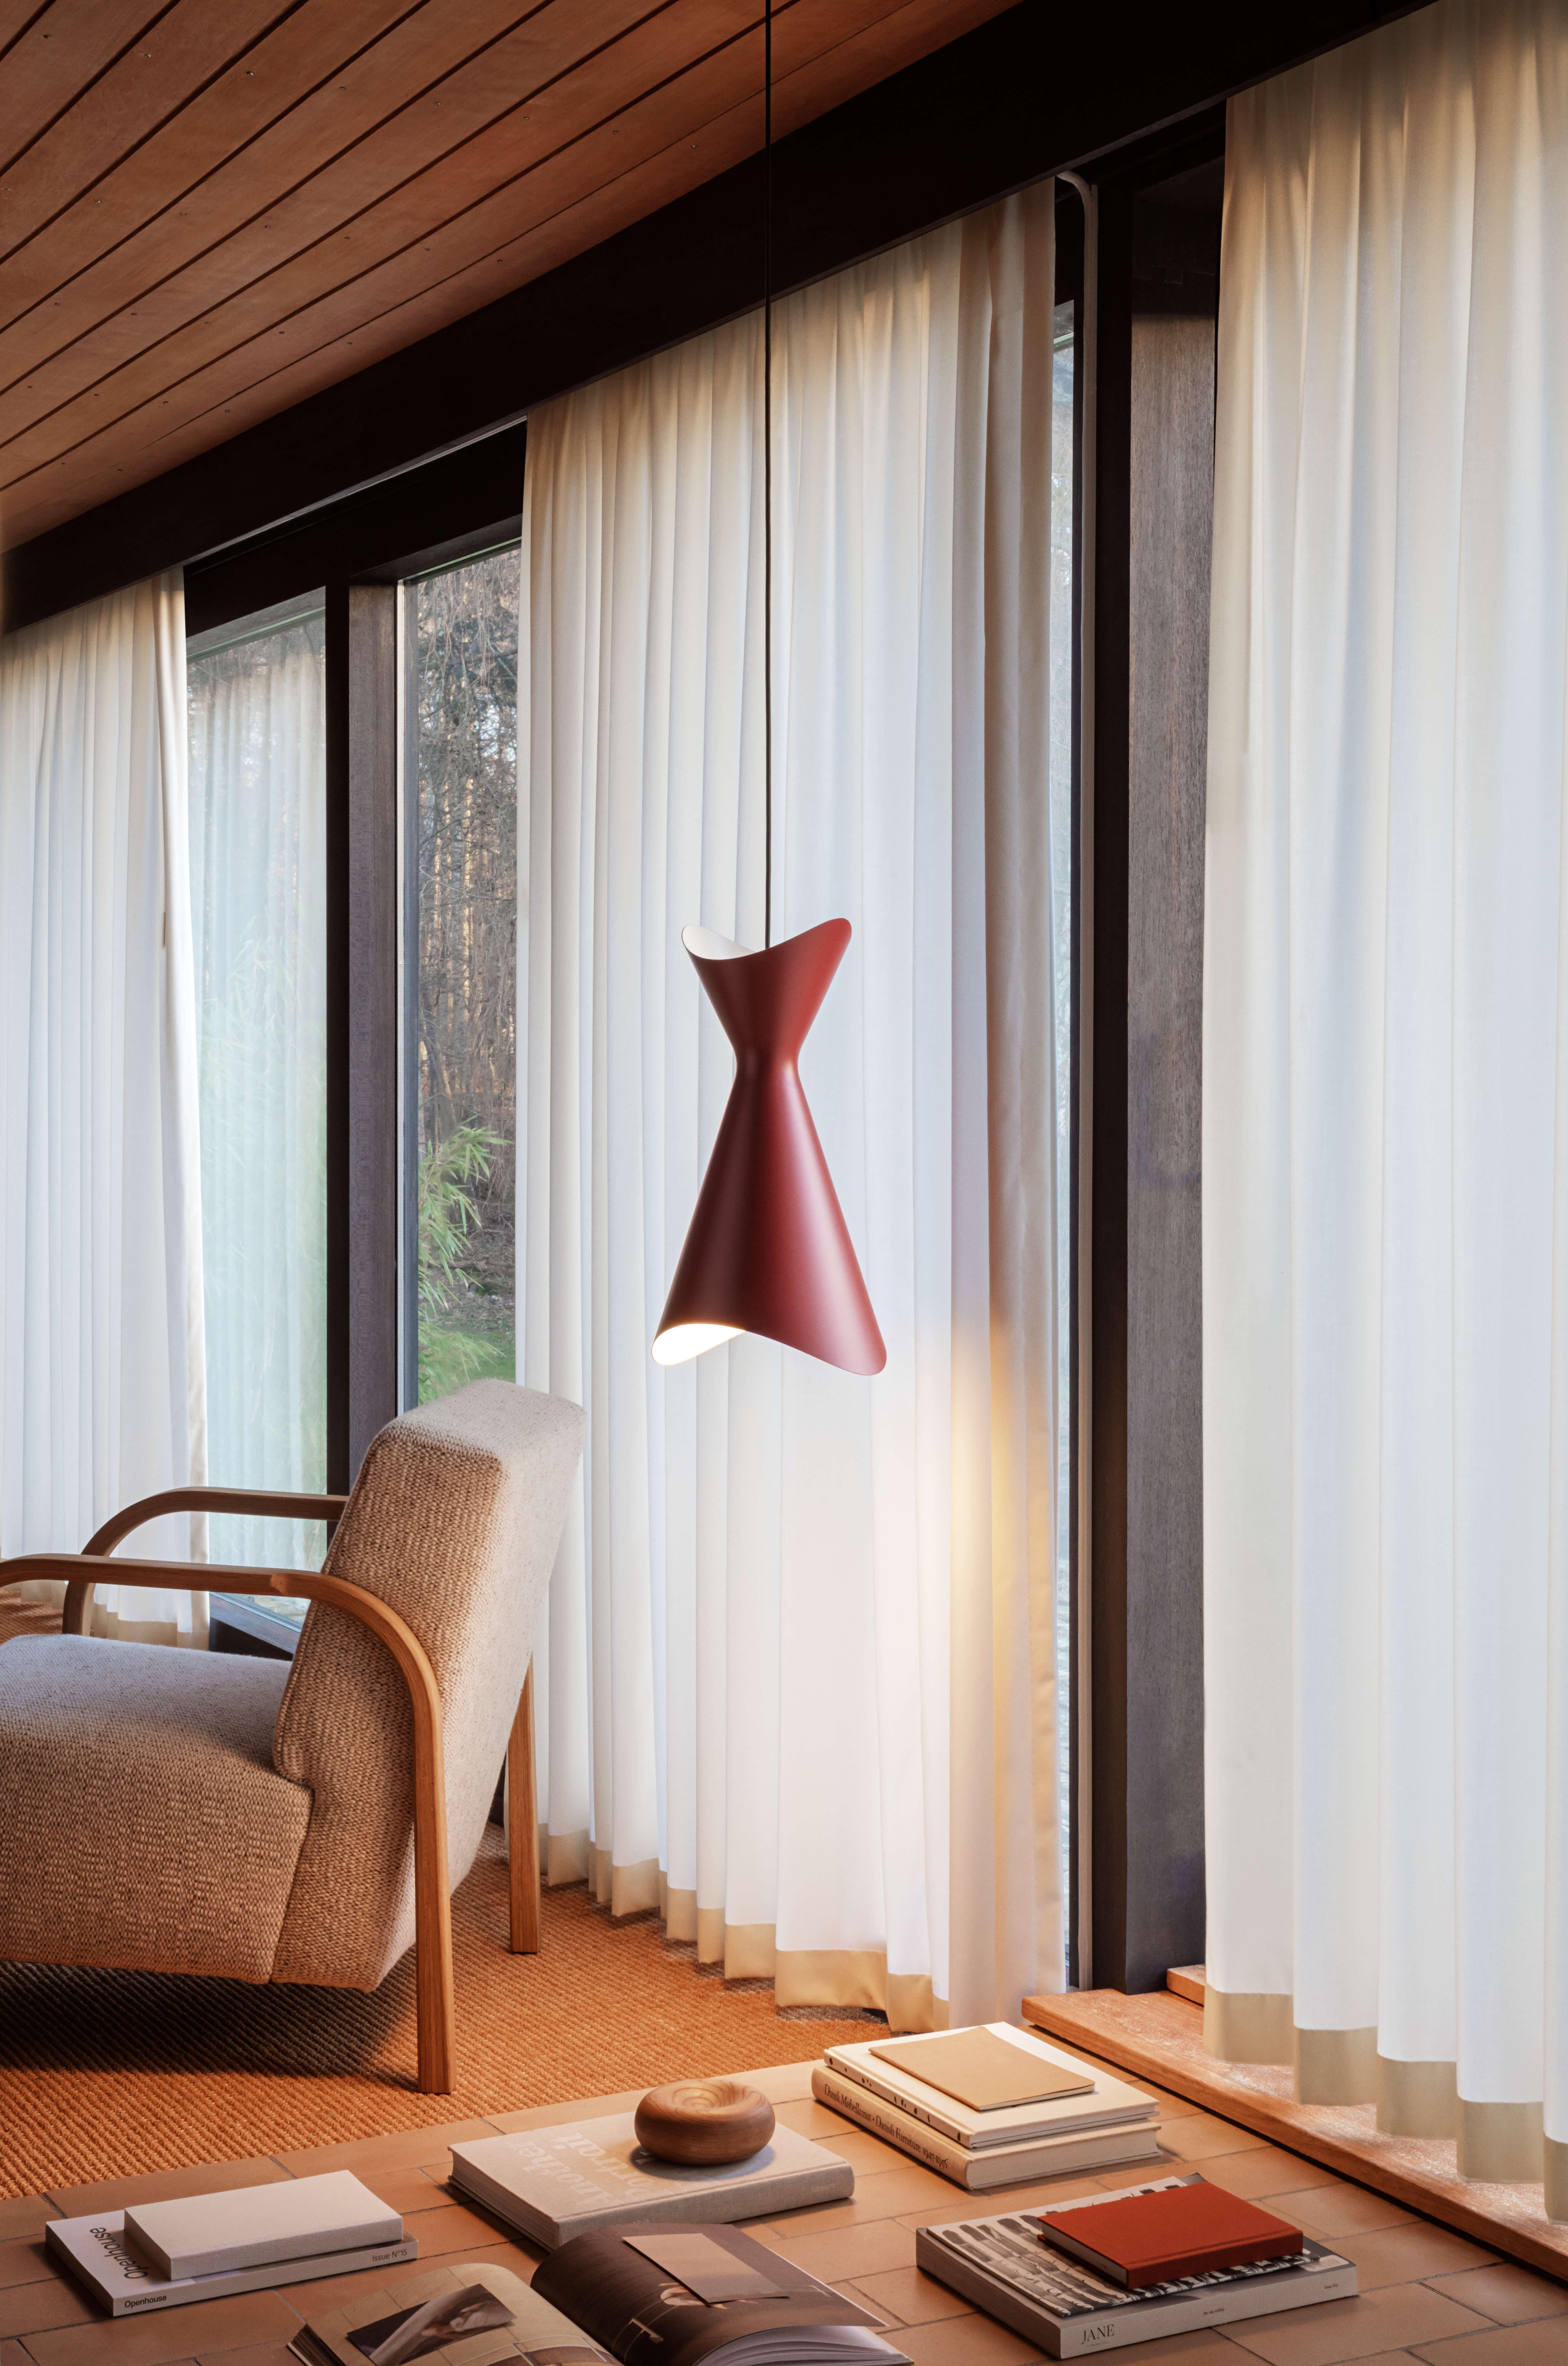 Ninotchka, red pendant lamp by Bent Karlby
Editor: LYFA

Size : H 76,4 x W 42,5 x D 37 cm
Materials : Steel

3m textile cord black or white, depending lampshade color

Light source (Not included)
Socket: E27
Max wattage: 60 Watt
Energy